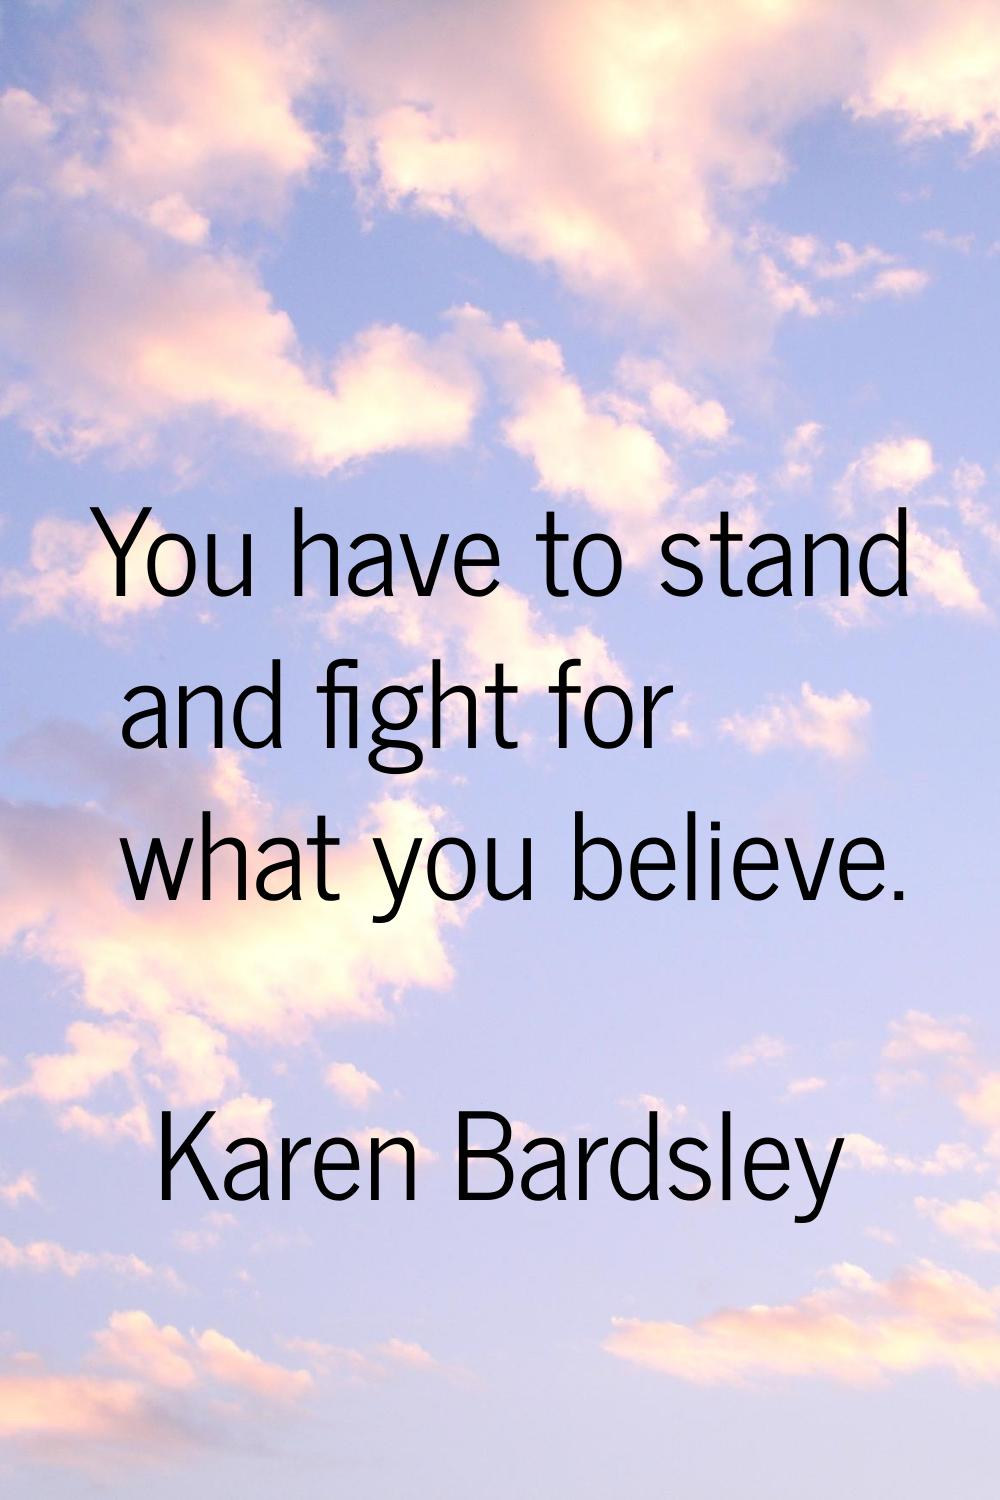 You have to stand and fight for what you believe.